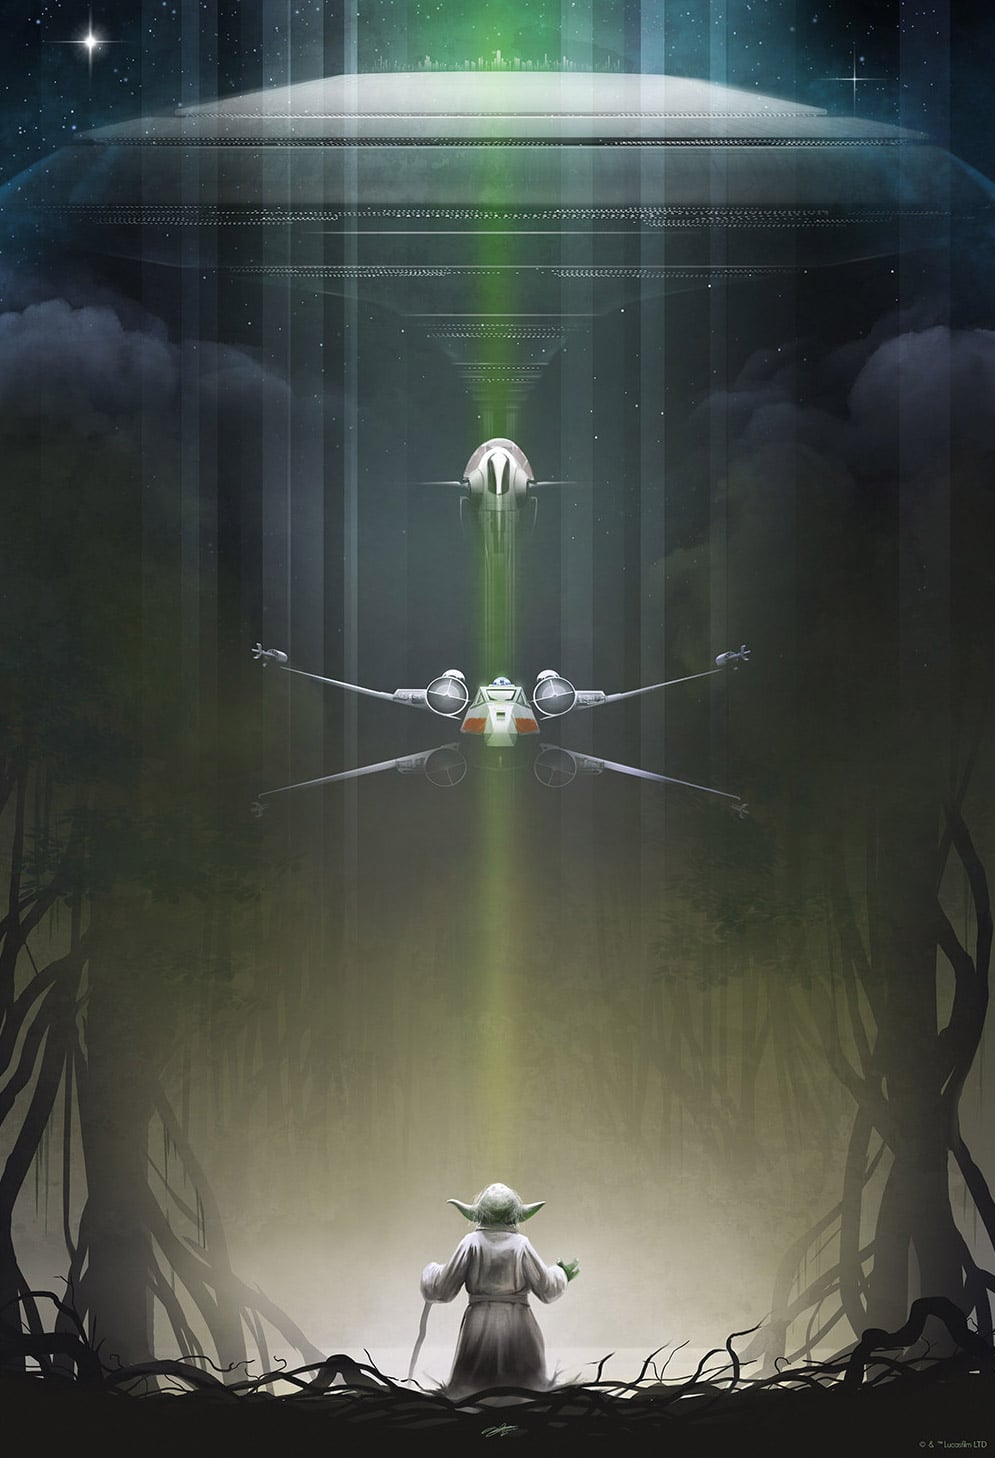 Official Star Wars Yoda Print from Andy Fairhurst